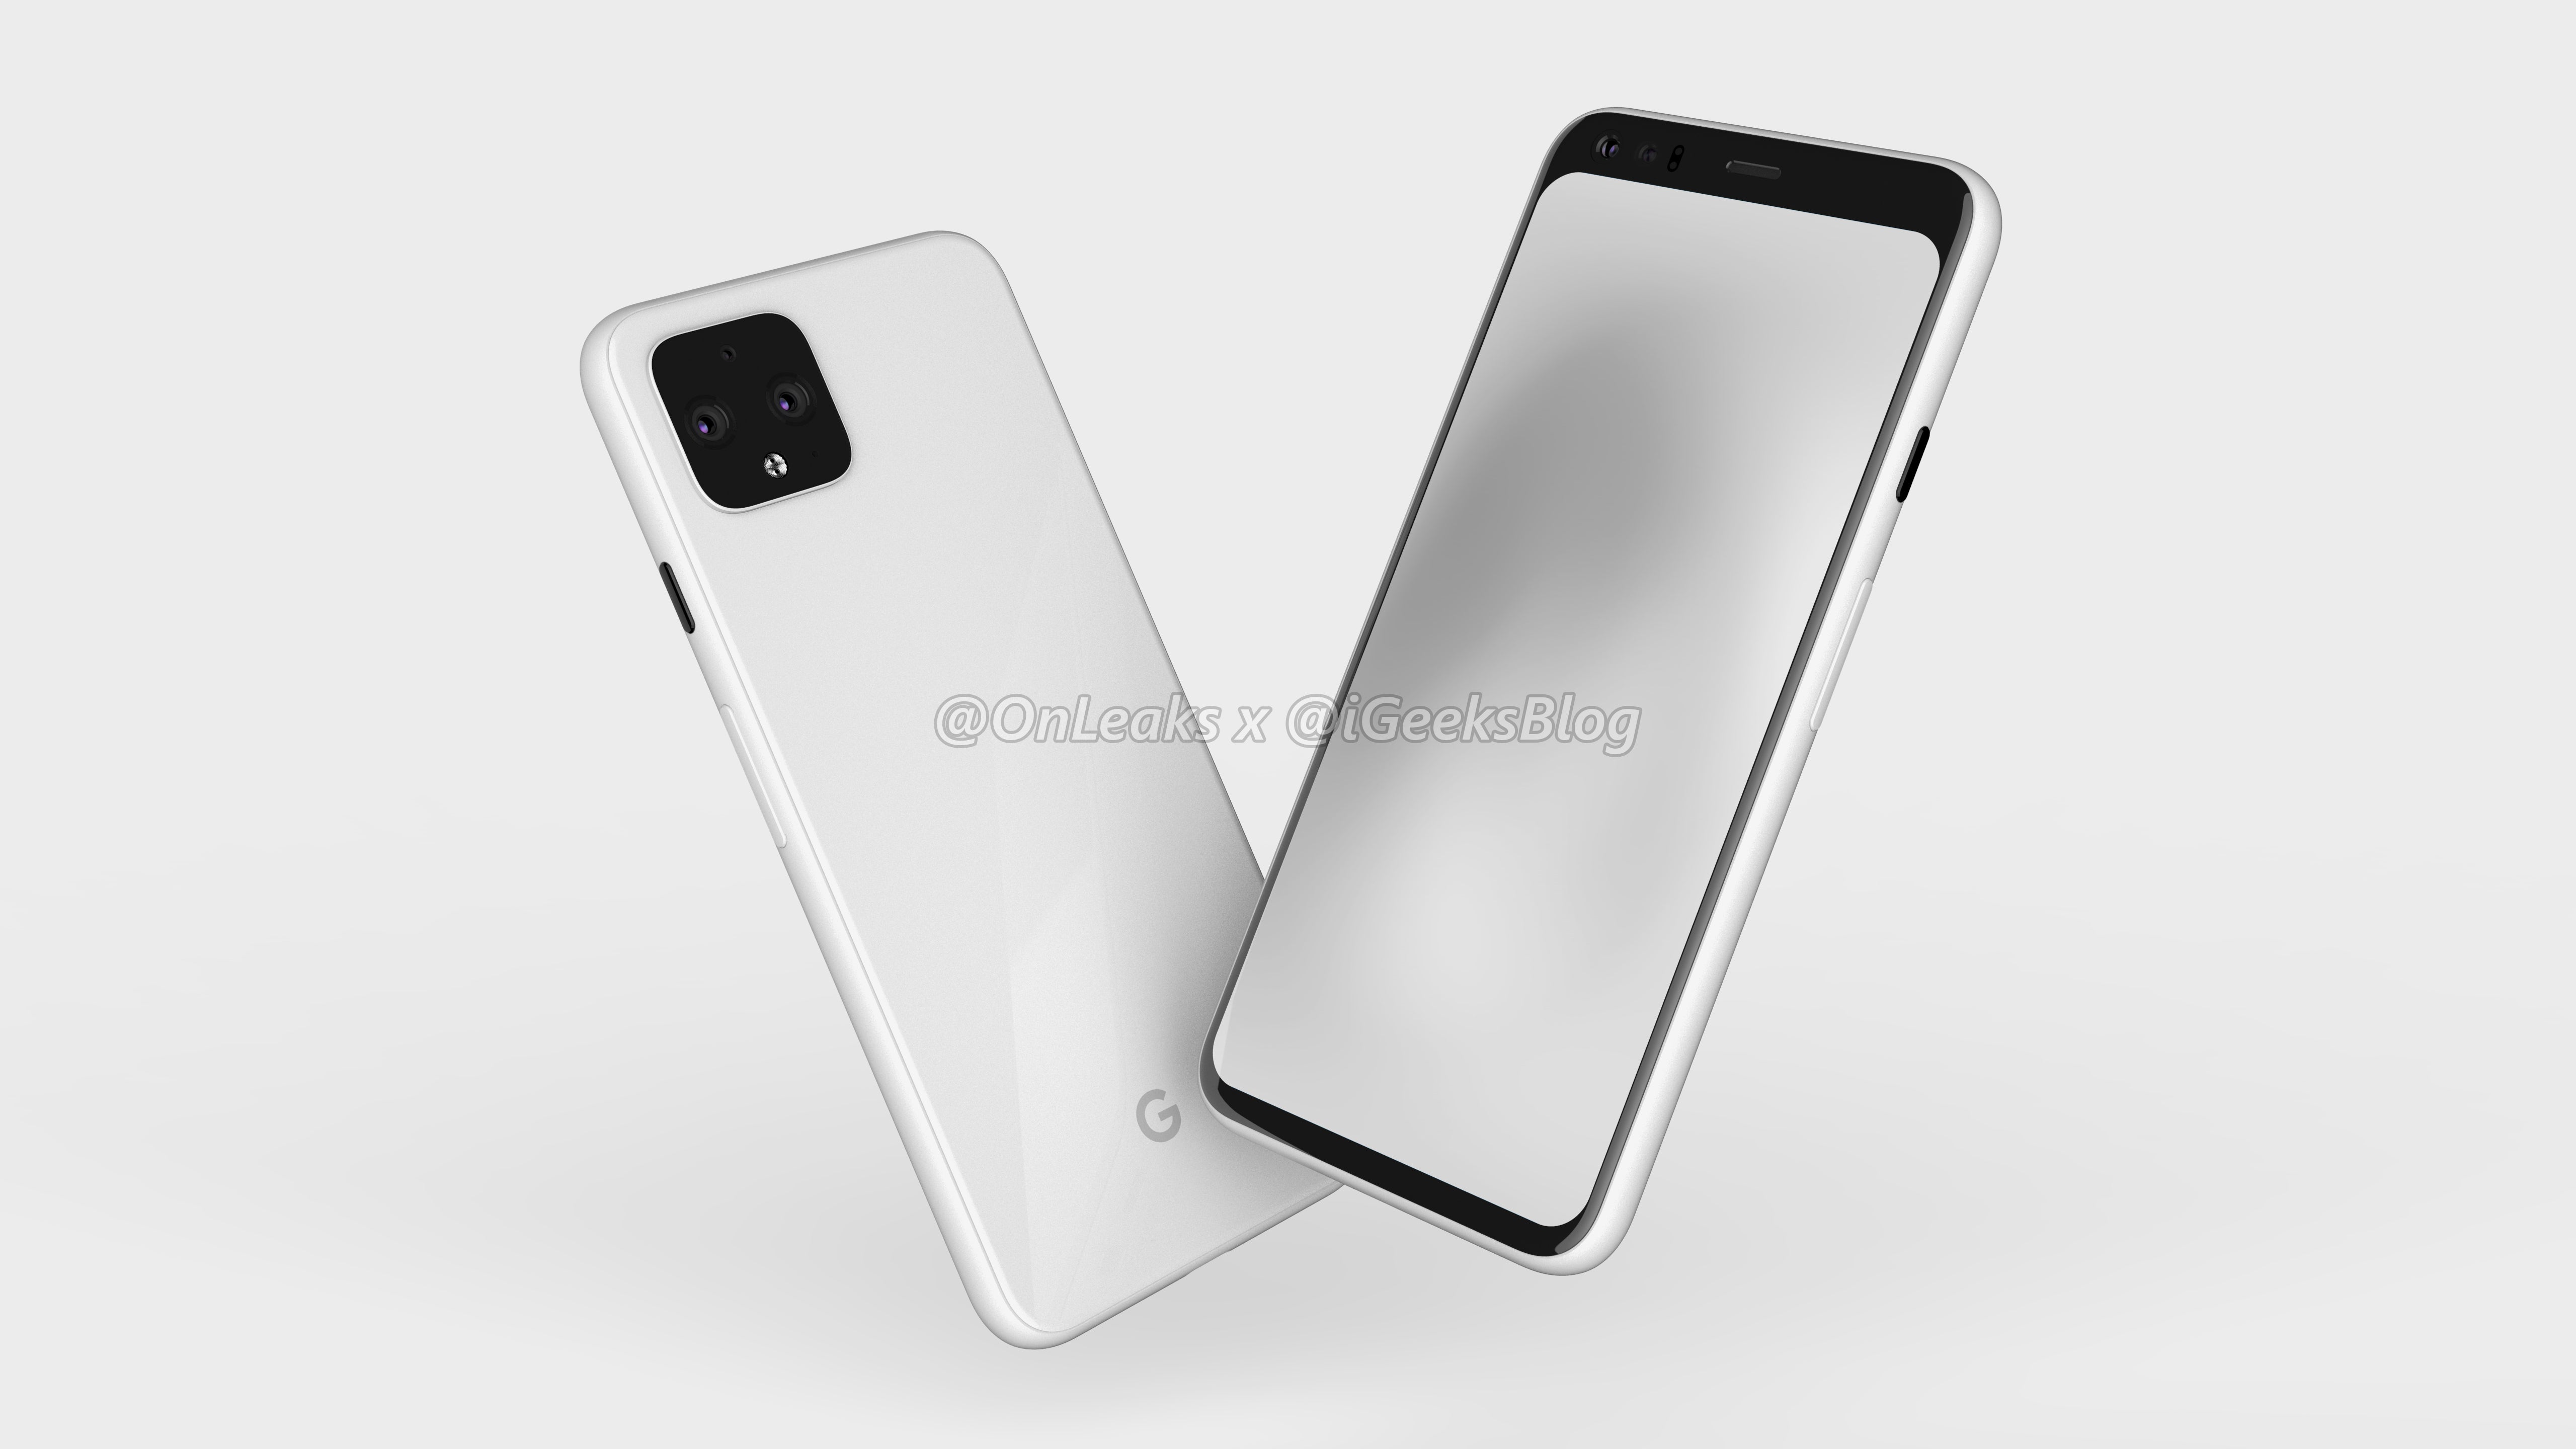 New render of the Google Pixel 4 - Check out the latest Google Pixel 4 renders